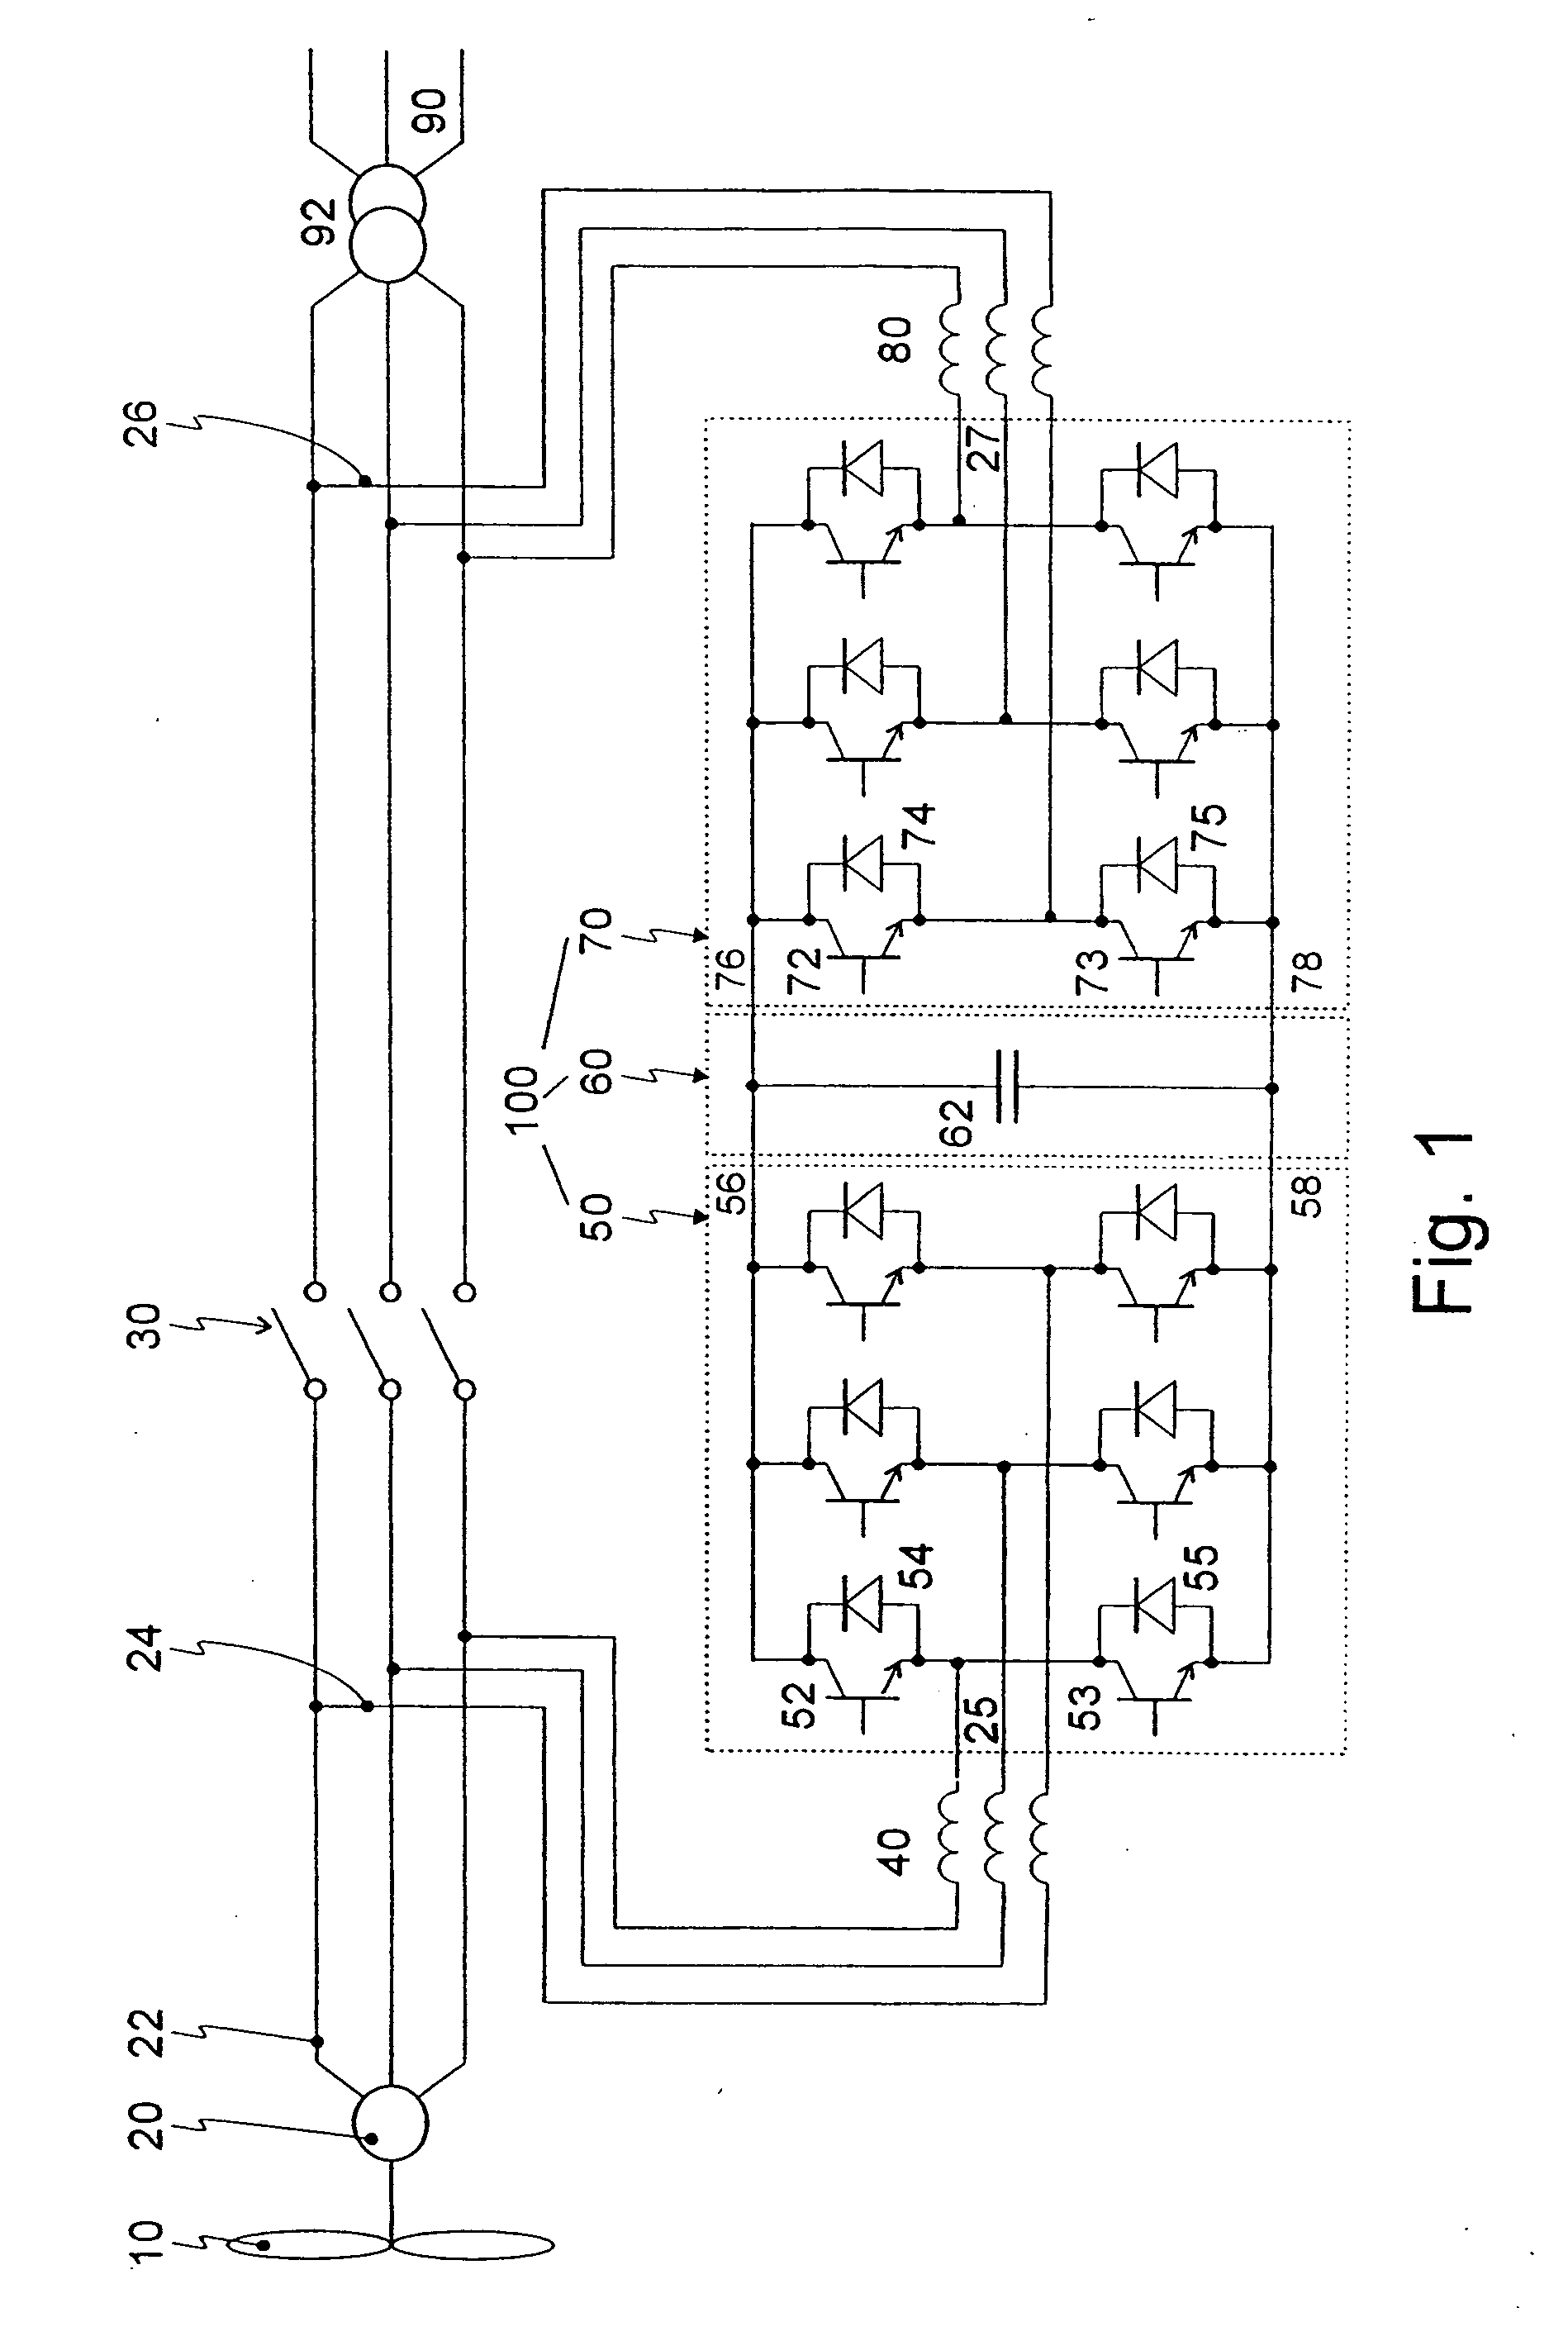 Power converter circuit and associated triggering method for generators with dynamically variable power output